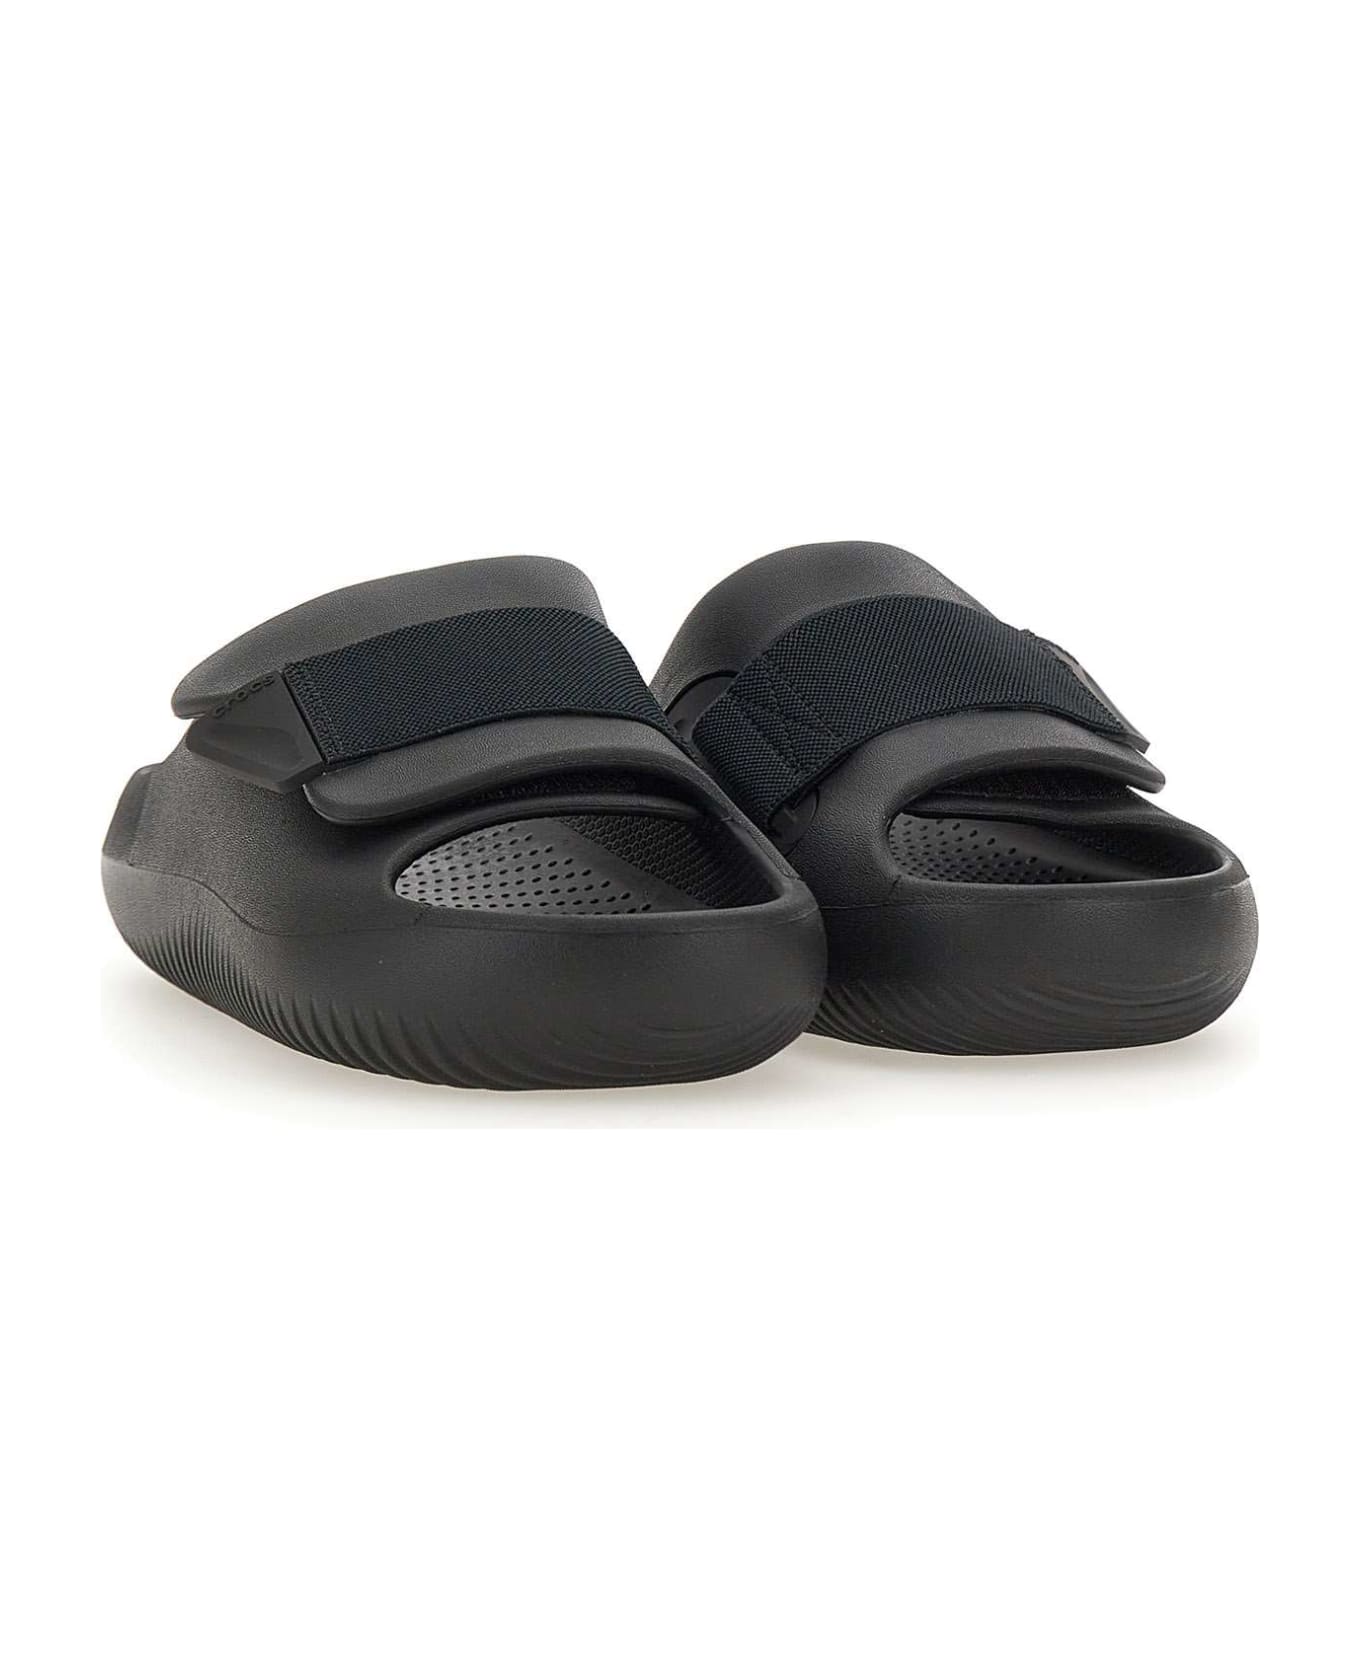 Crocs 'mellow Luxe Recovery' Sandals - Black